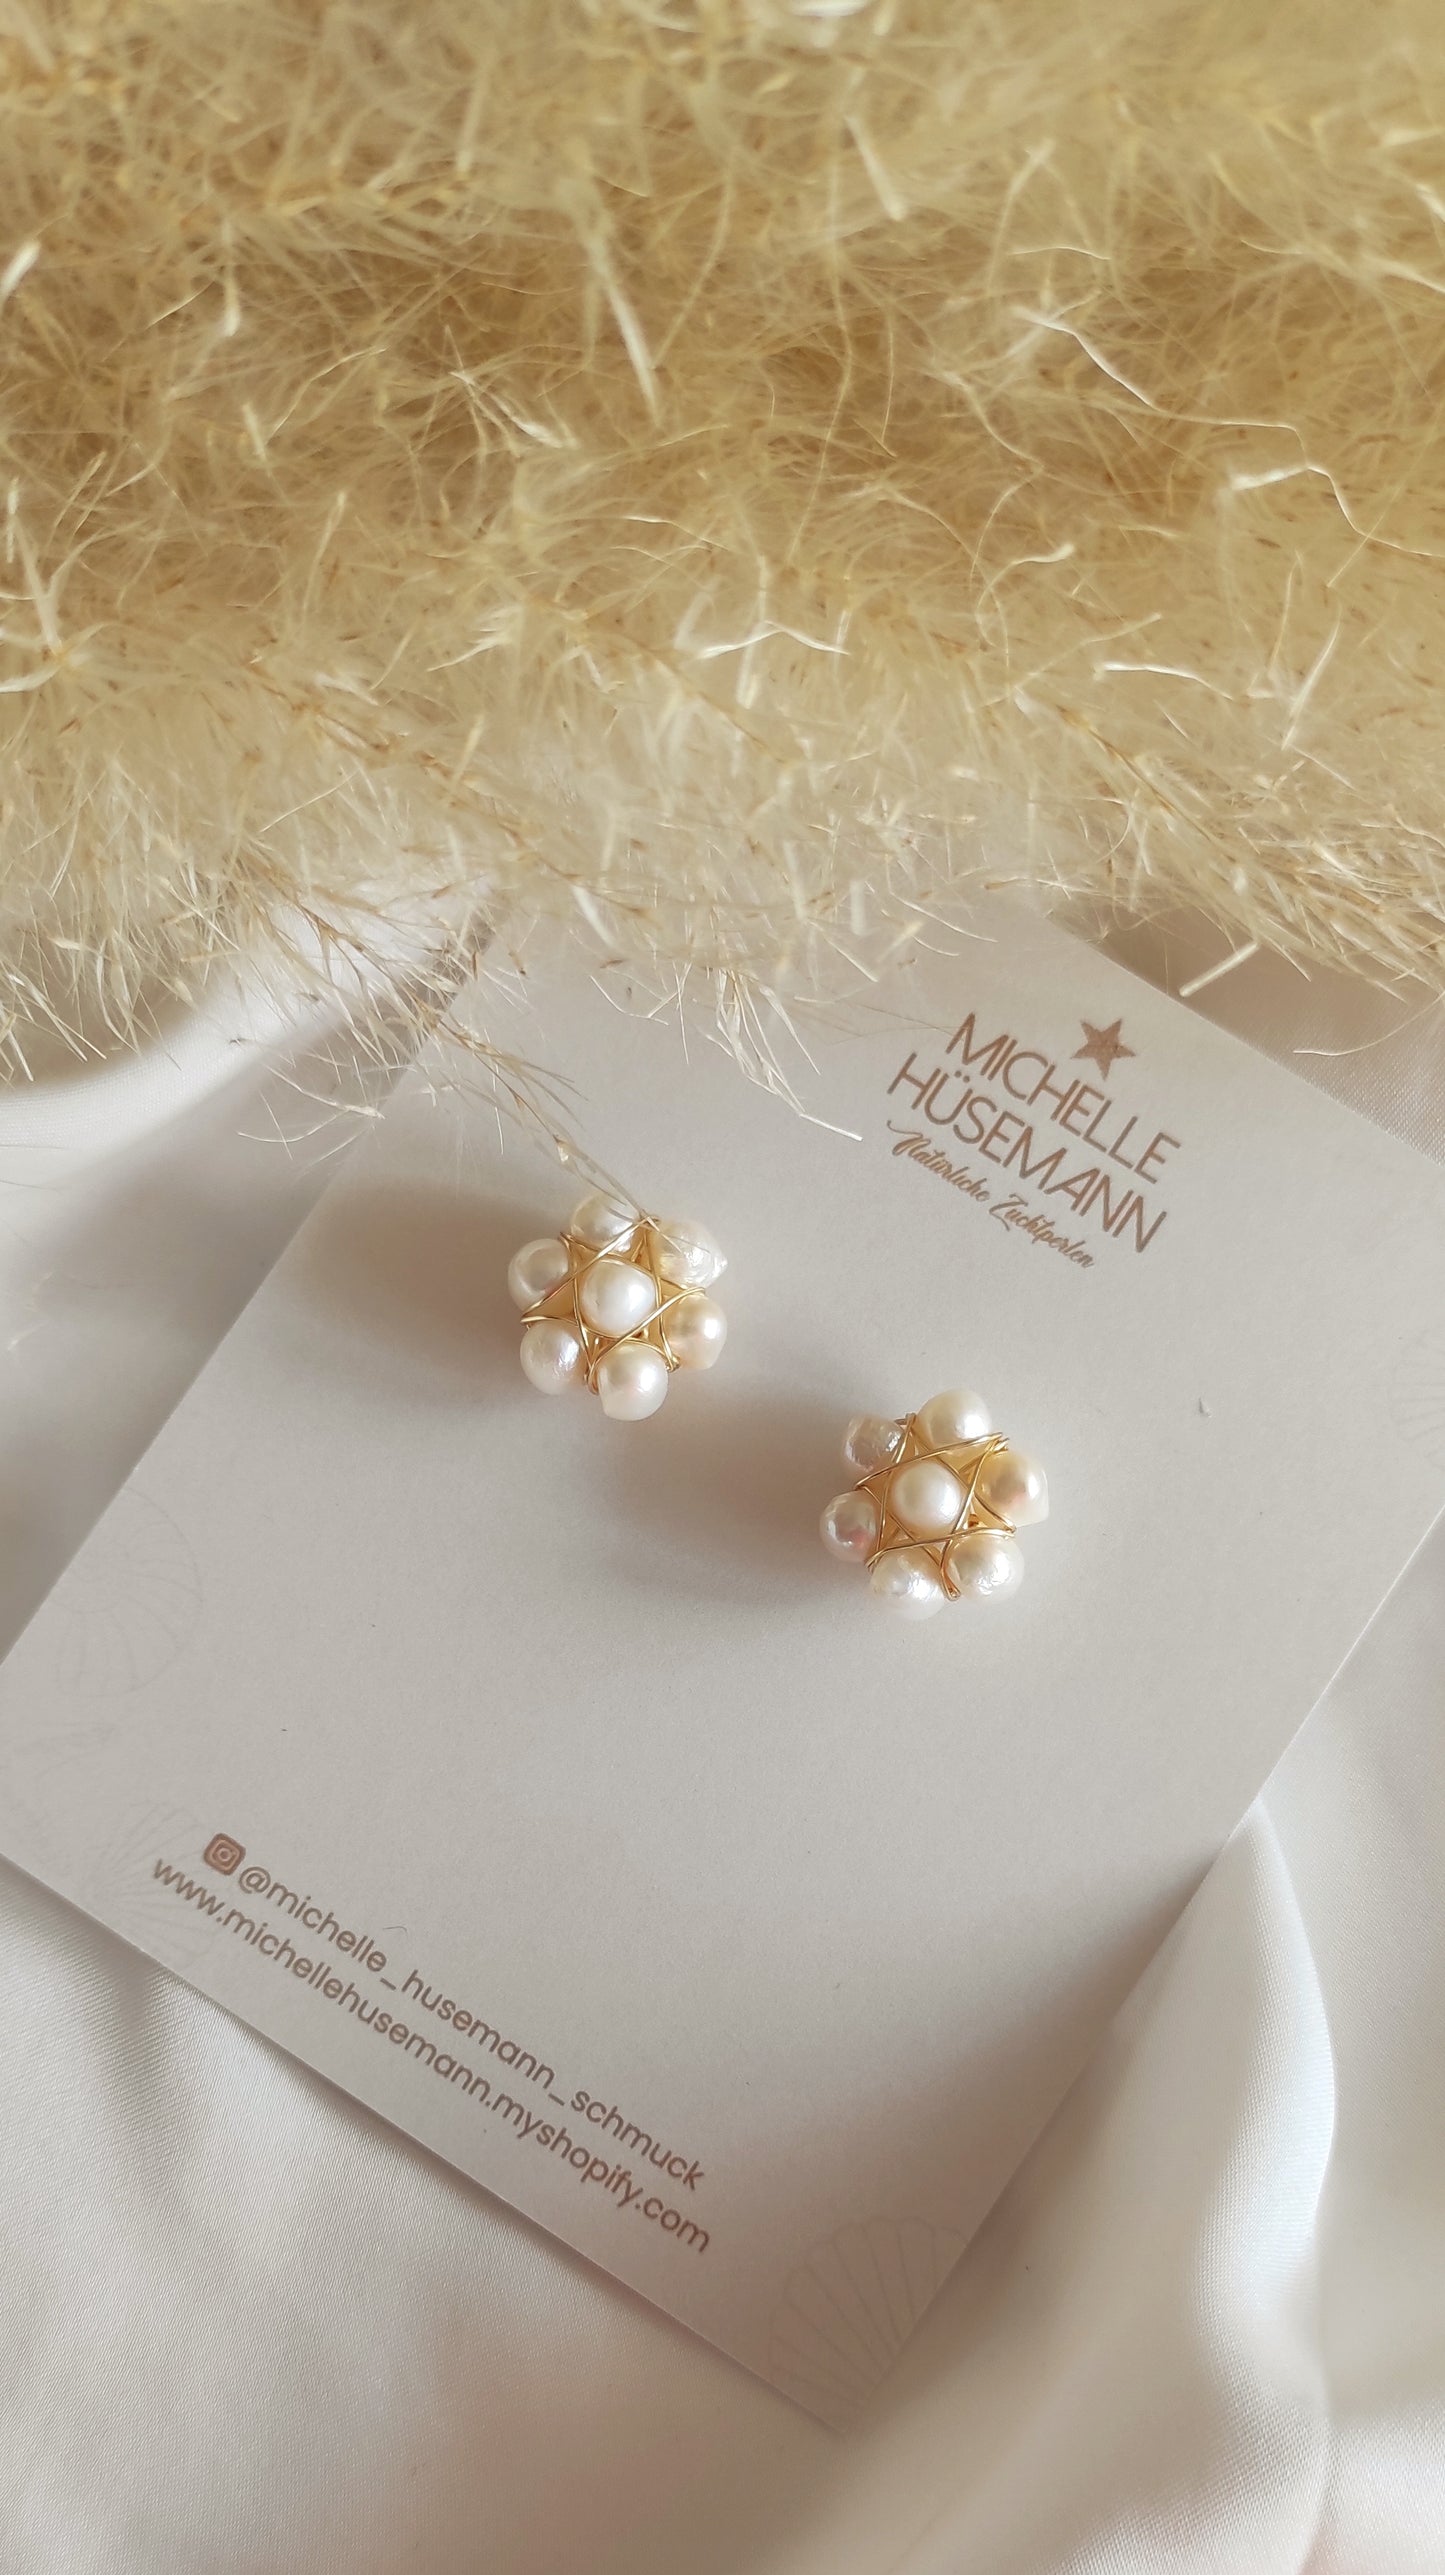 Attractive flower-shaped earrings MARGARITA with natural pearls